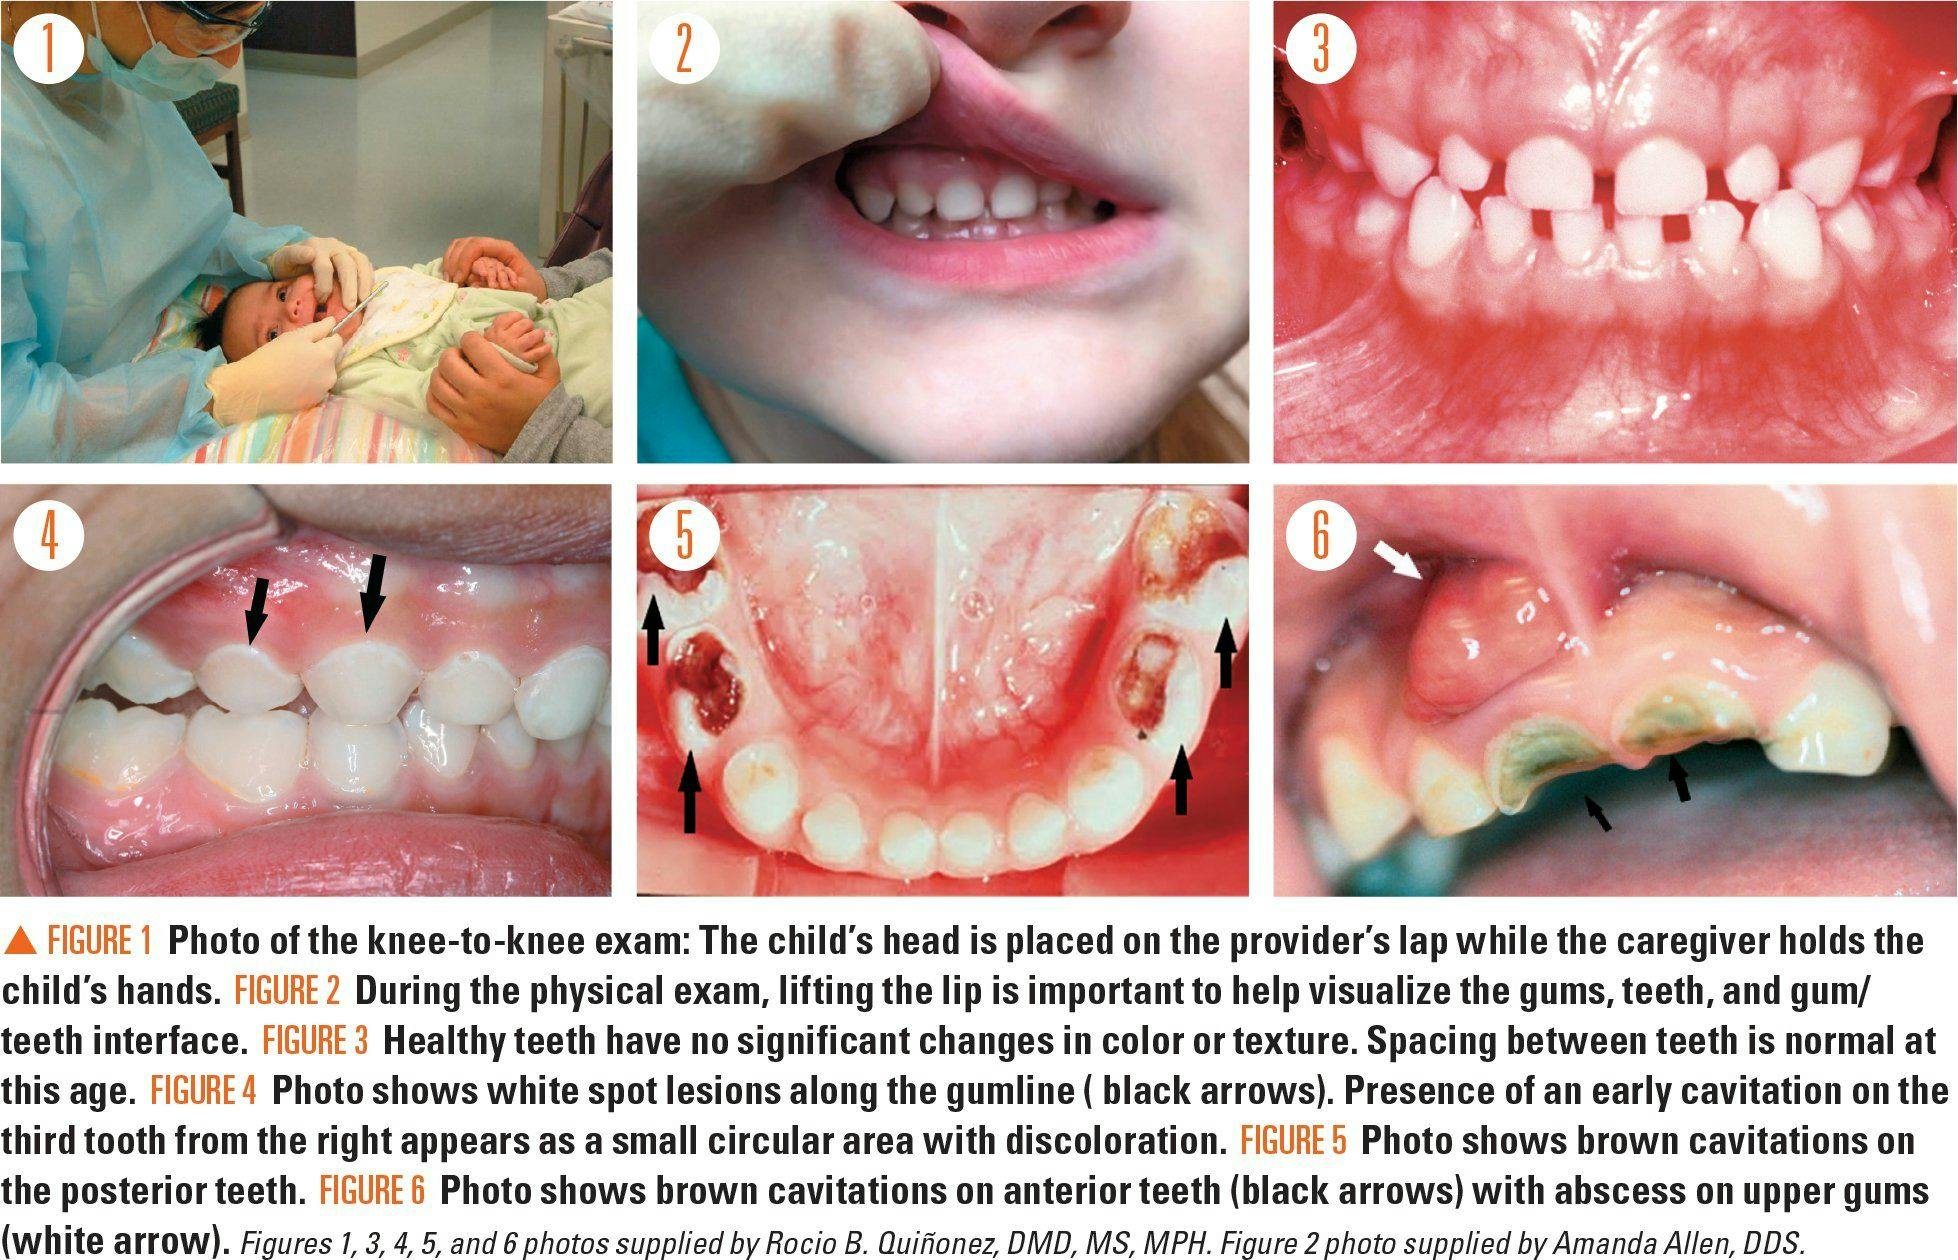 Figure 1-6 showing oral care exams and photos of teeth